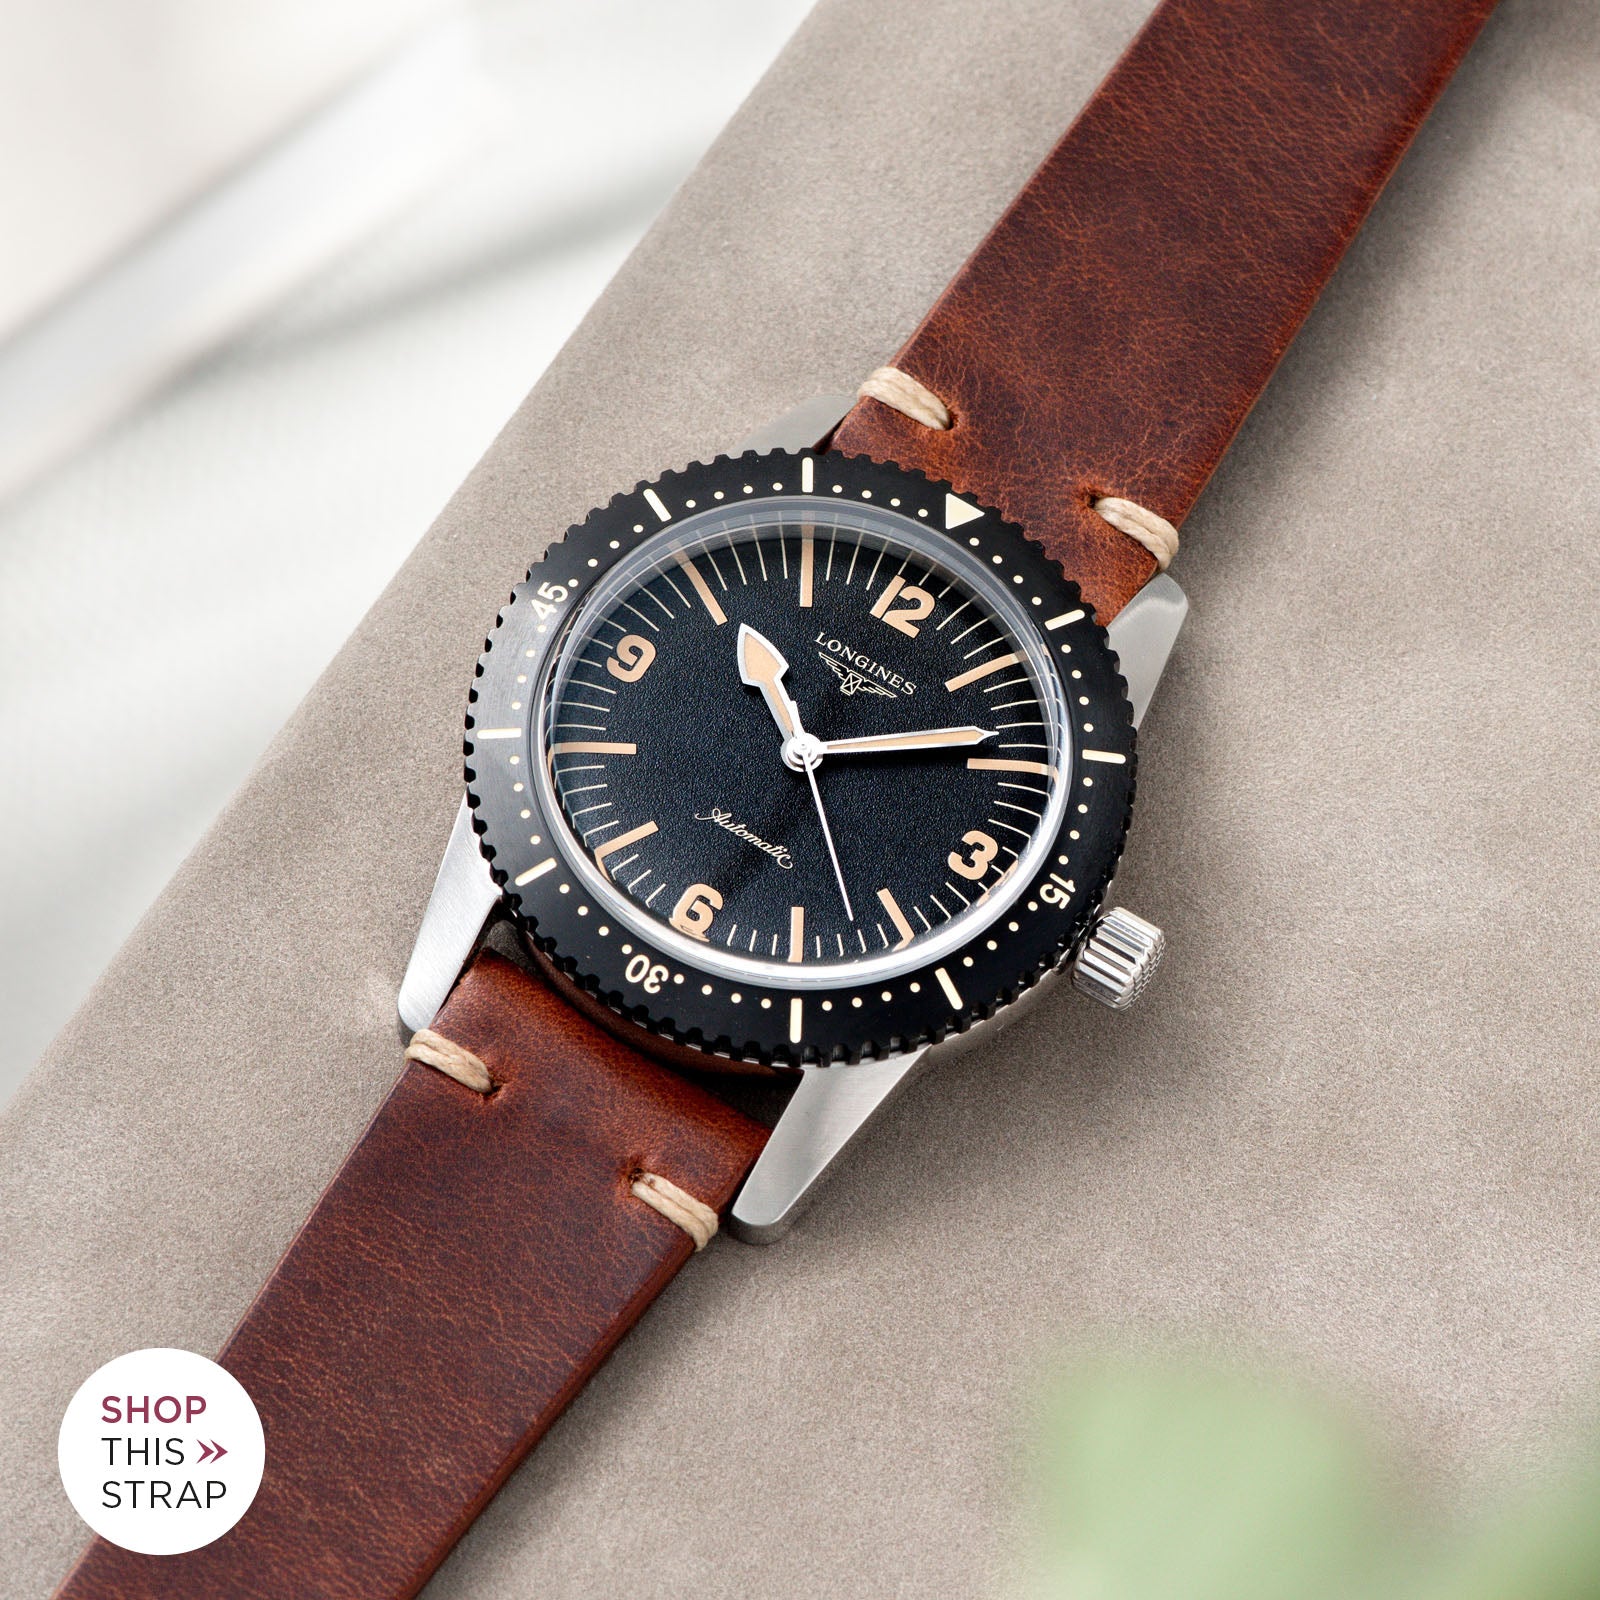 Bulang and Sons_Strap Guide_Longines Skin Diver_Siena Brown Leather Watch-Strap